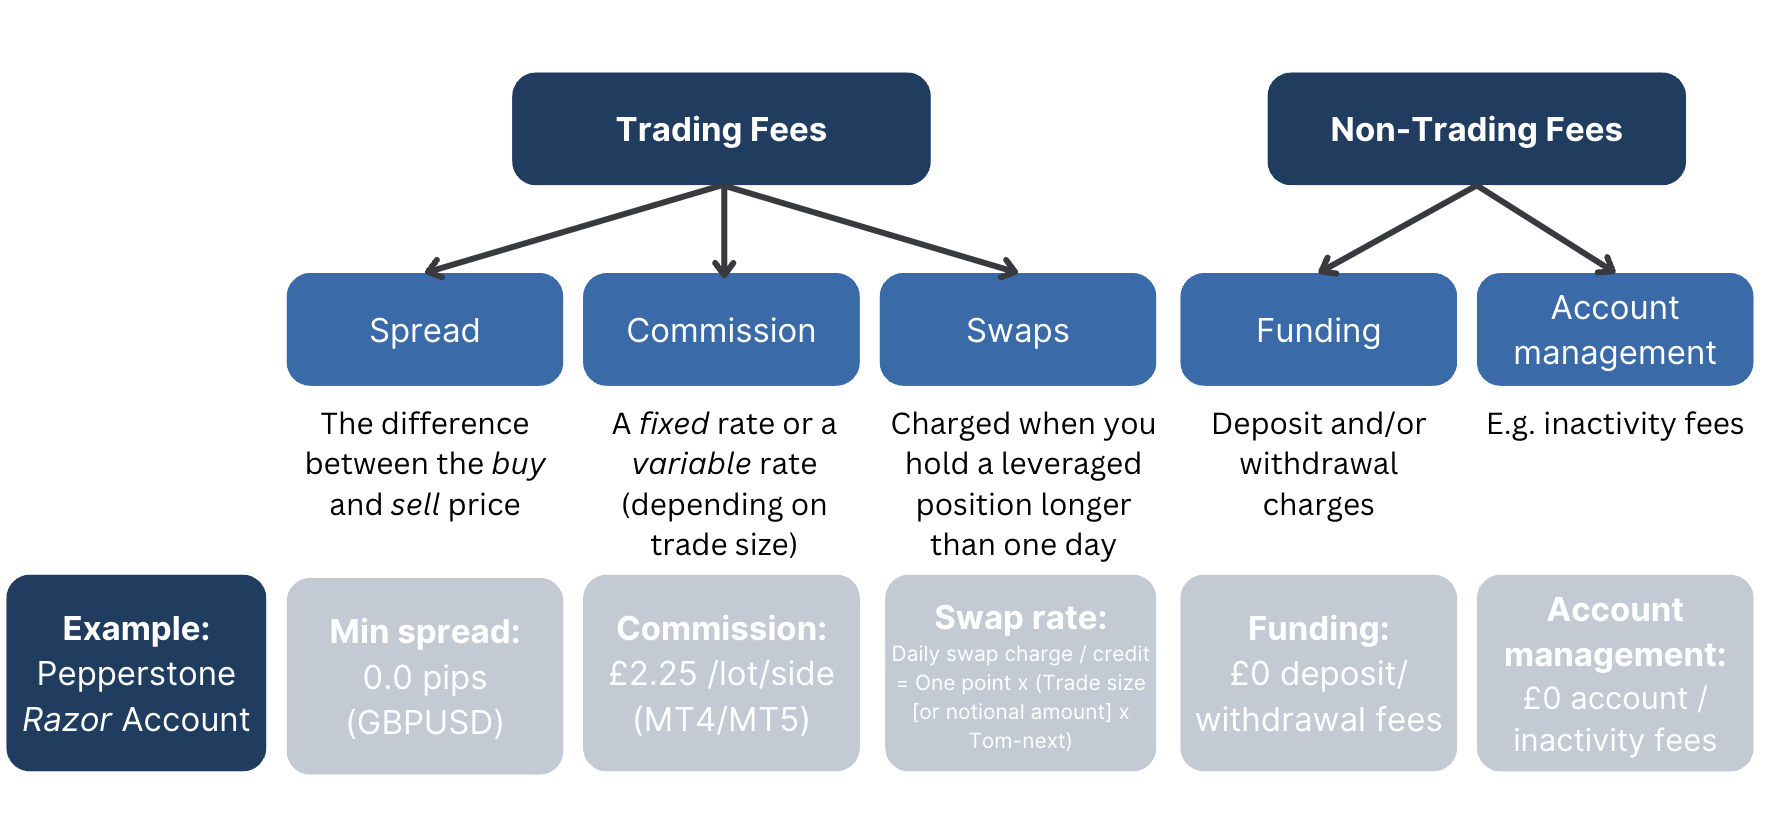 Infographic showing typical trading and non-trading fees, with Pepperstone example